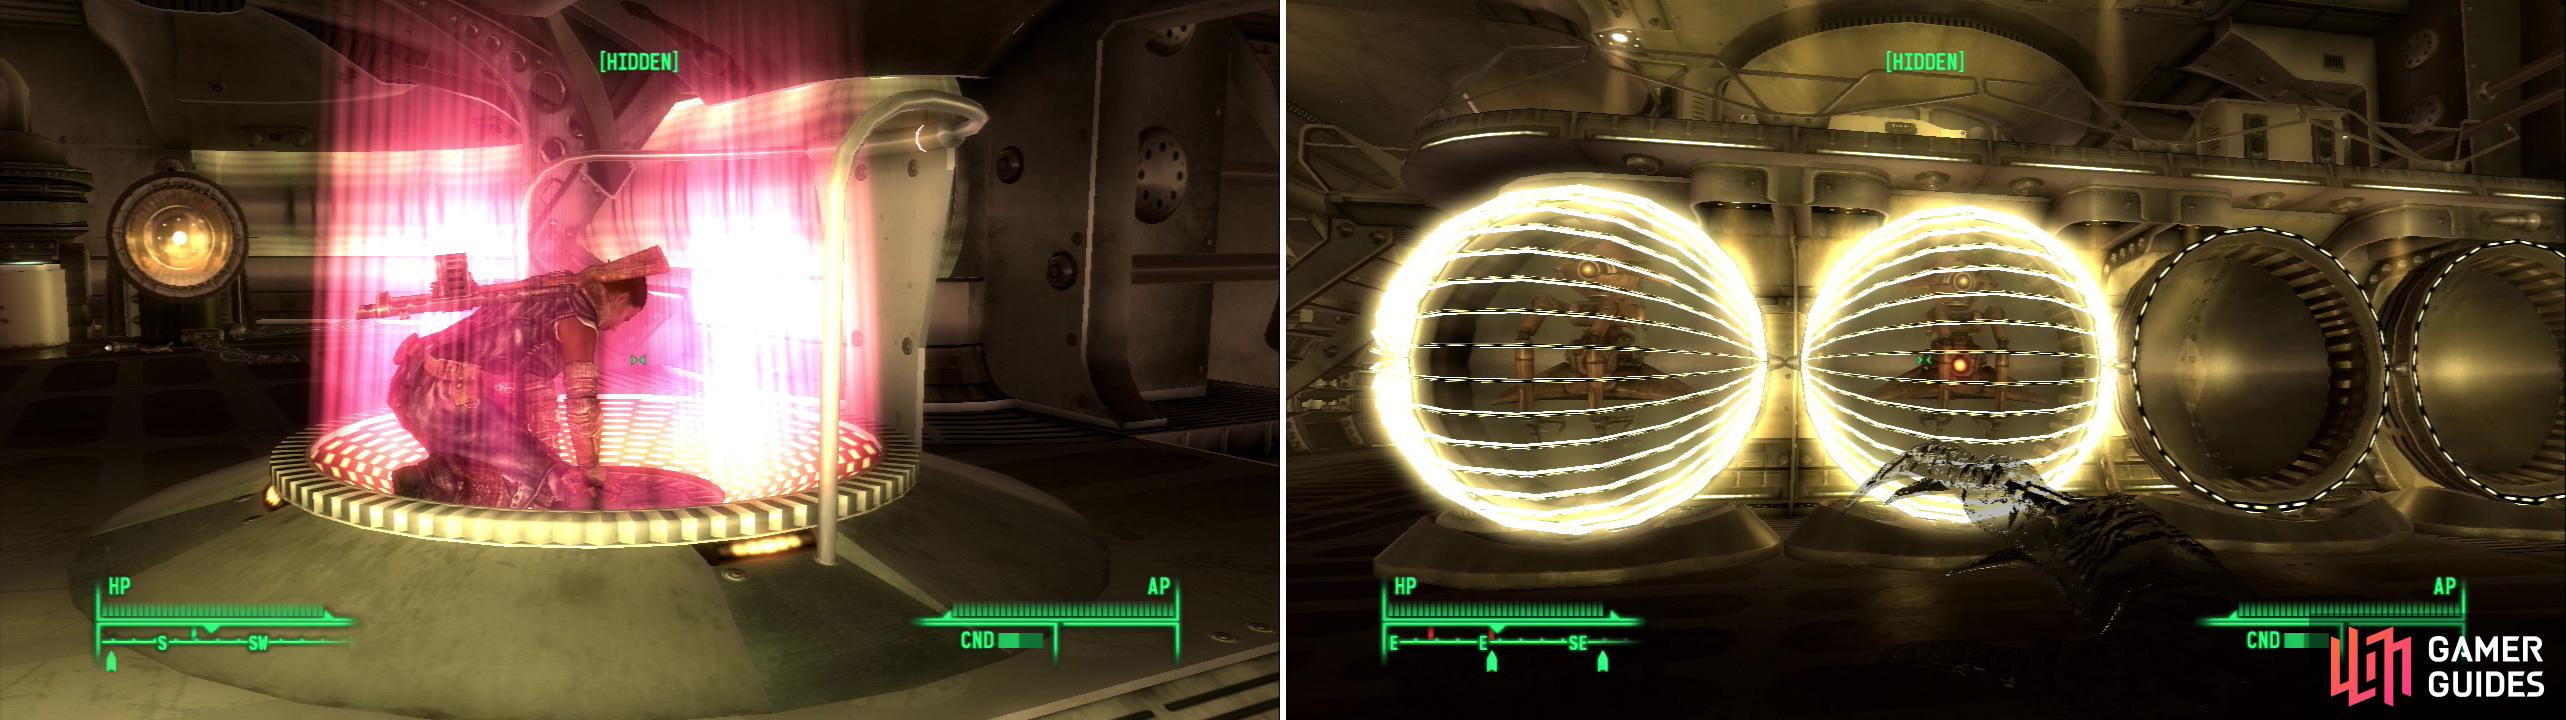 Somah tampers with a deactivated teleporter, and her incompetence strikes again (left). Robots in stasis can be activated with the “Drone Control Device” (right).